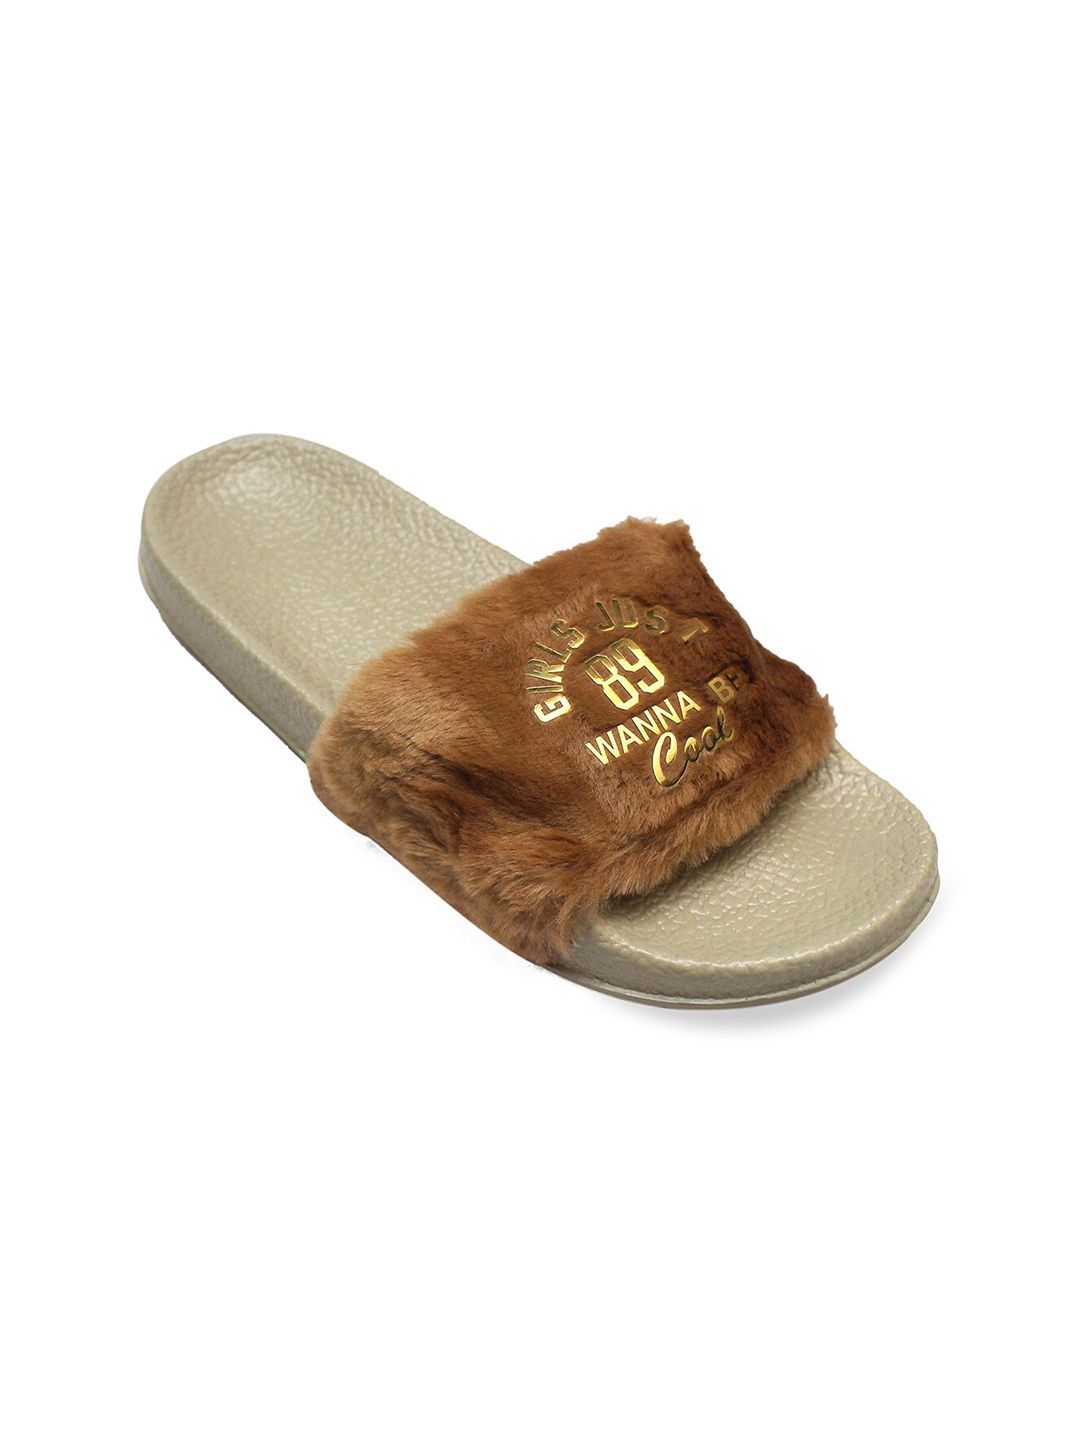 ADIVER Women Brown & Cream-Coloured Embellished Sliders Price in India